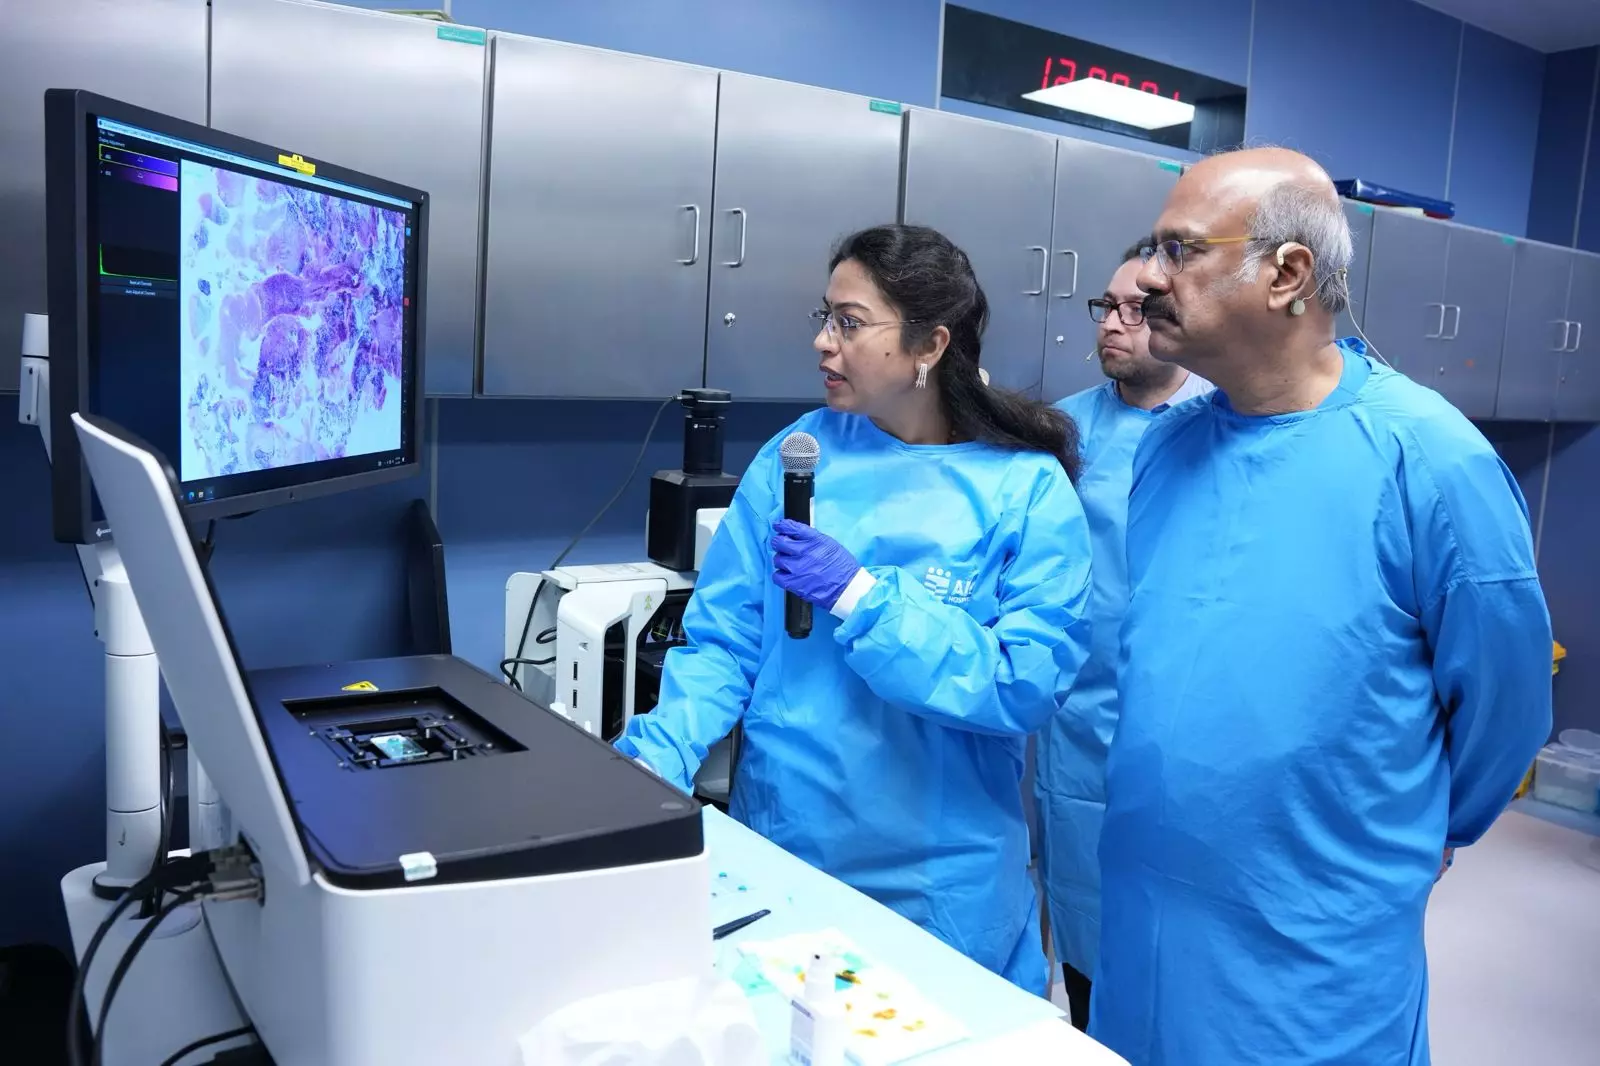 AIG Hospitals Introduces Groundbreaking 5-Minute Biopsy Technology - A First for Asia Pacific